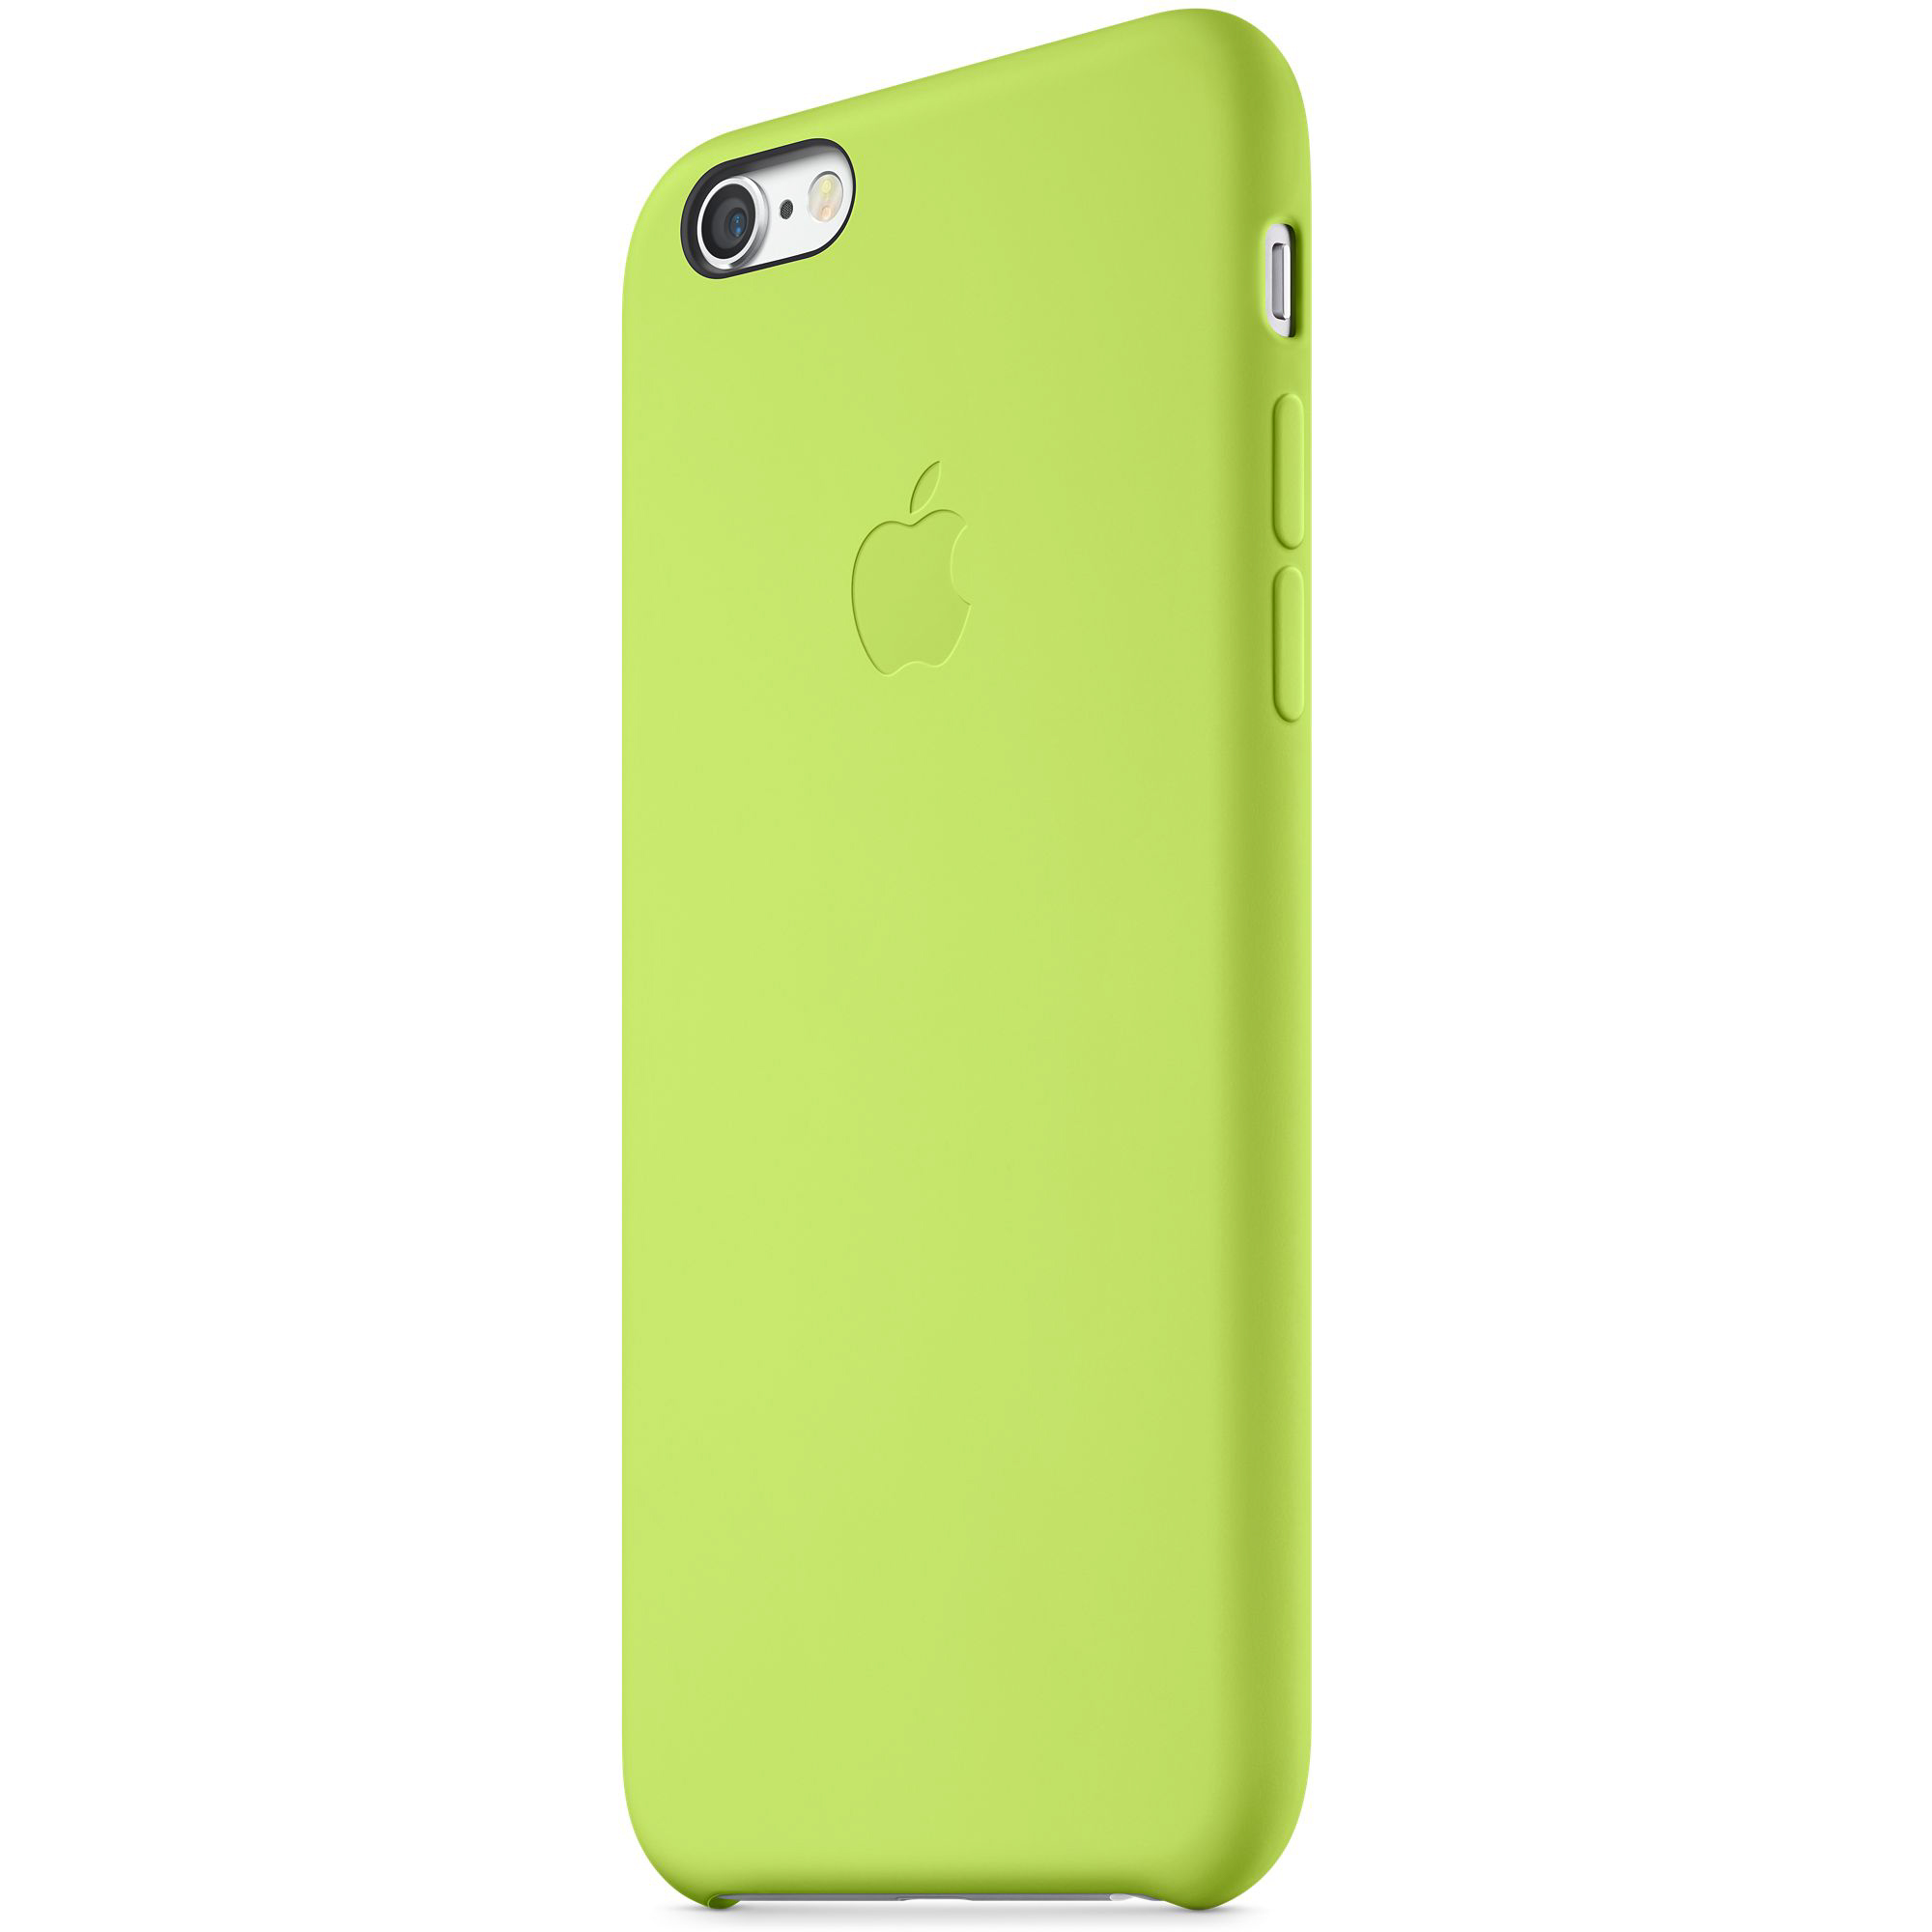 Be the first to review “Apple iPhone 6s Silicone Case” Cancel 